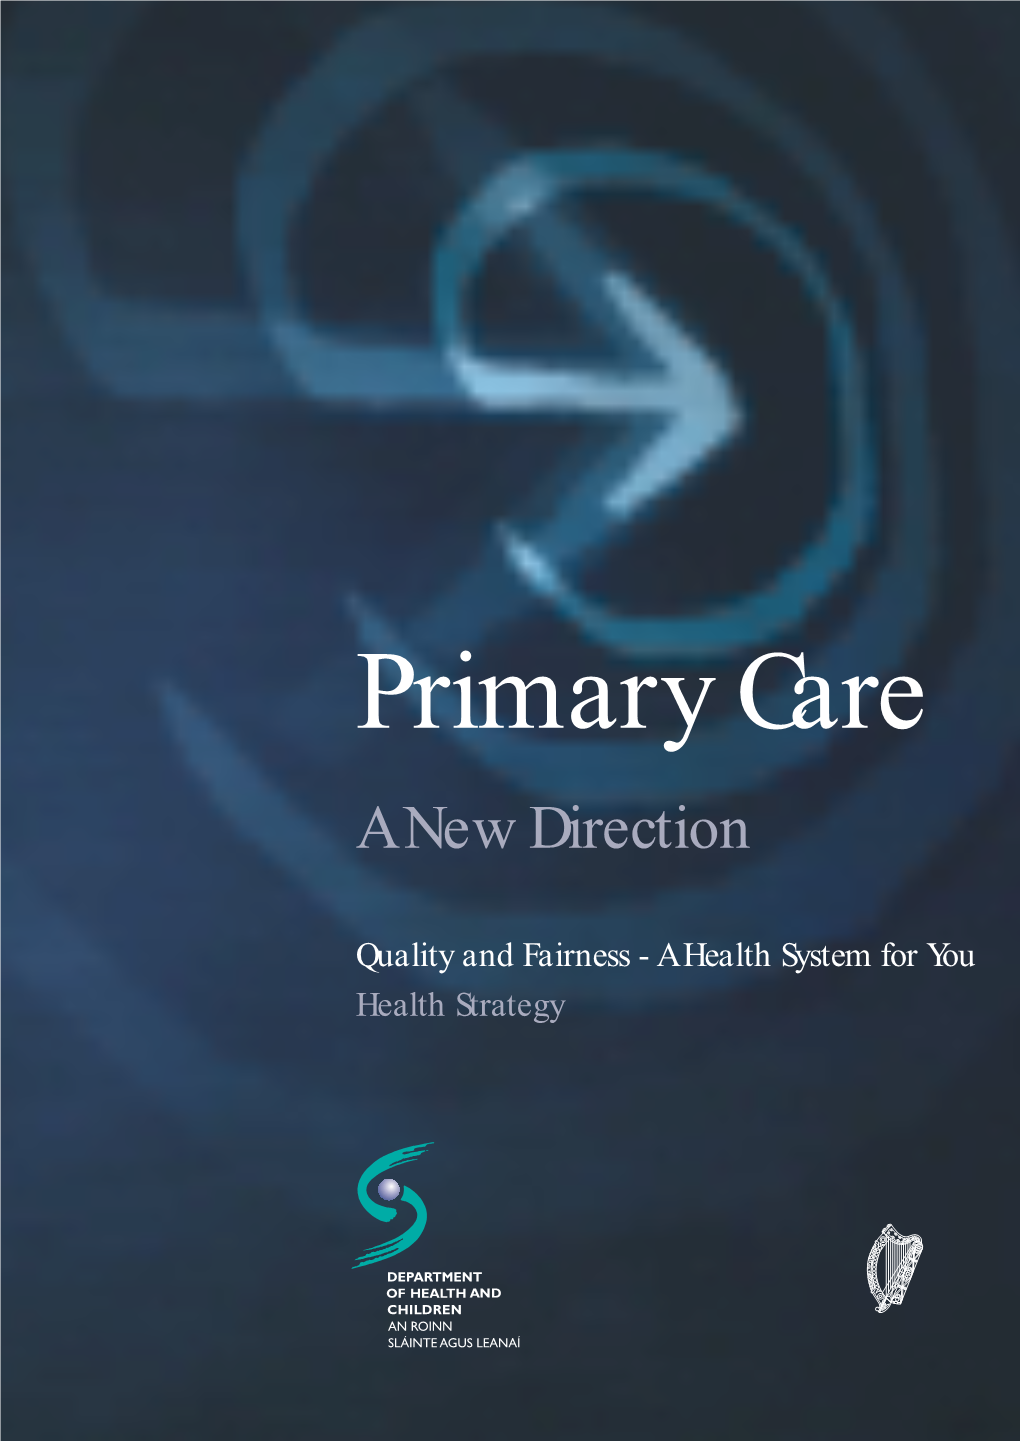 Primary Care. This Strategy